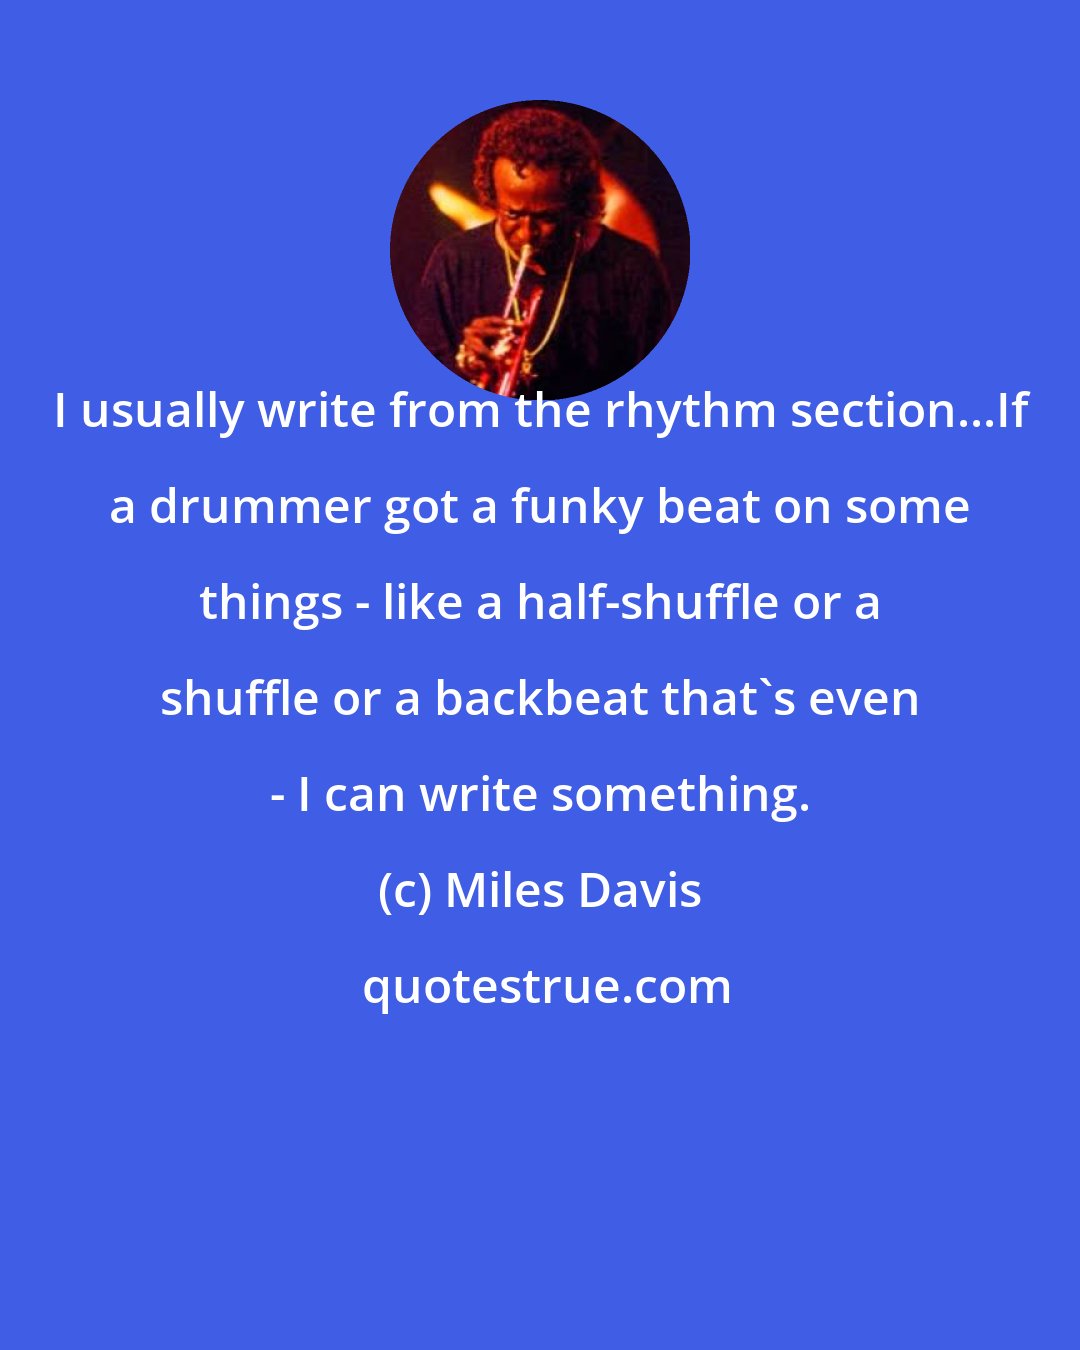 Miles Davis: I usually write from the rhythm section...If a drummer got a funky beat on some things - like a half-shuffle or a shuffle or a backbeat that's even - I can write something.